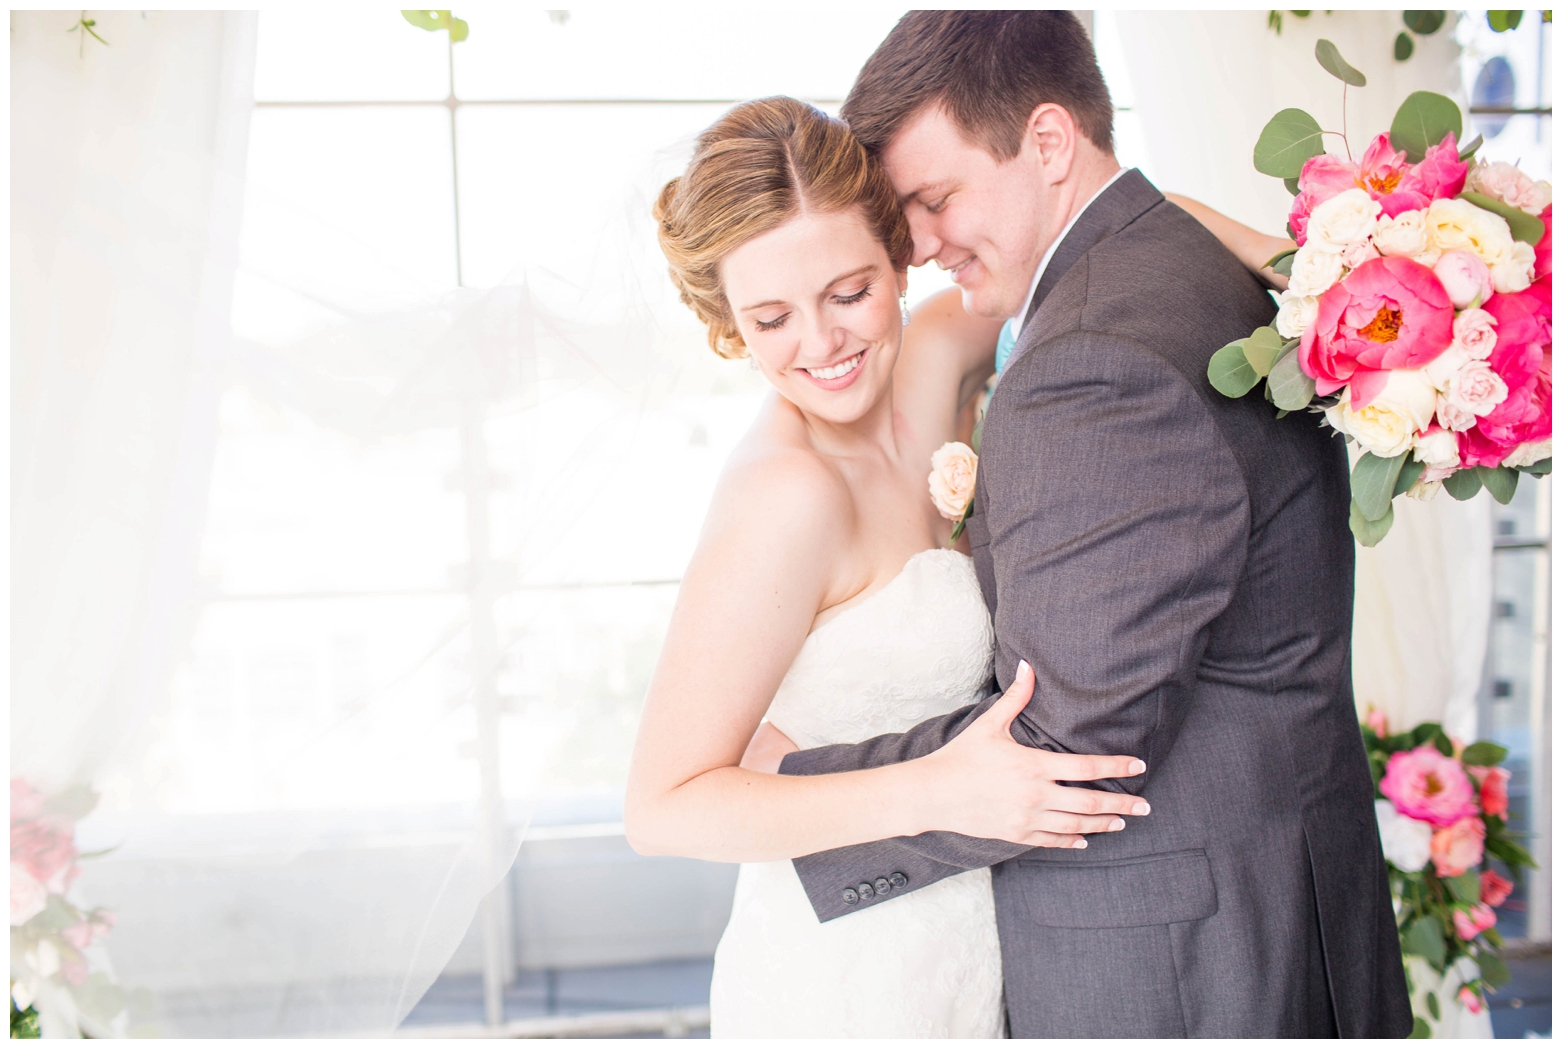 View More: http://hopetaylorphotographyphotos.pass.us/emily-and-zach